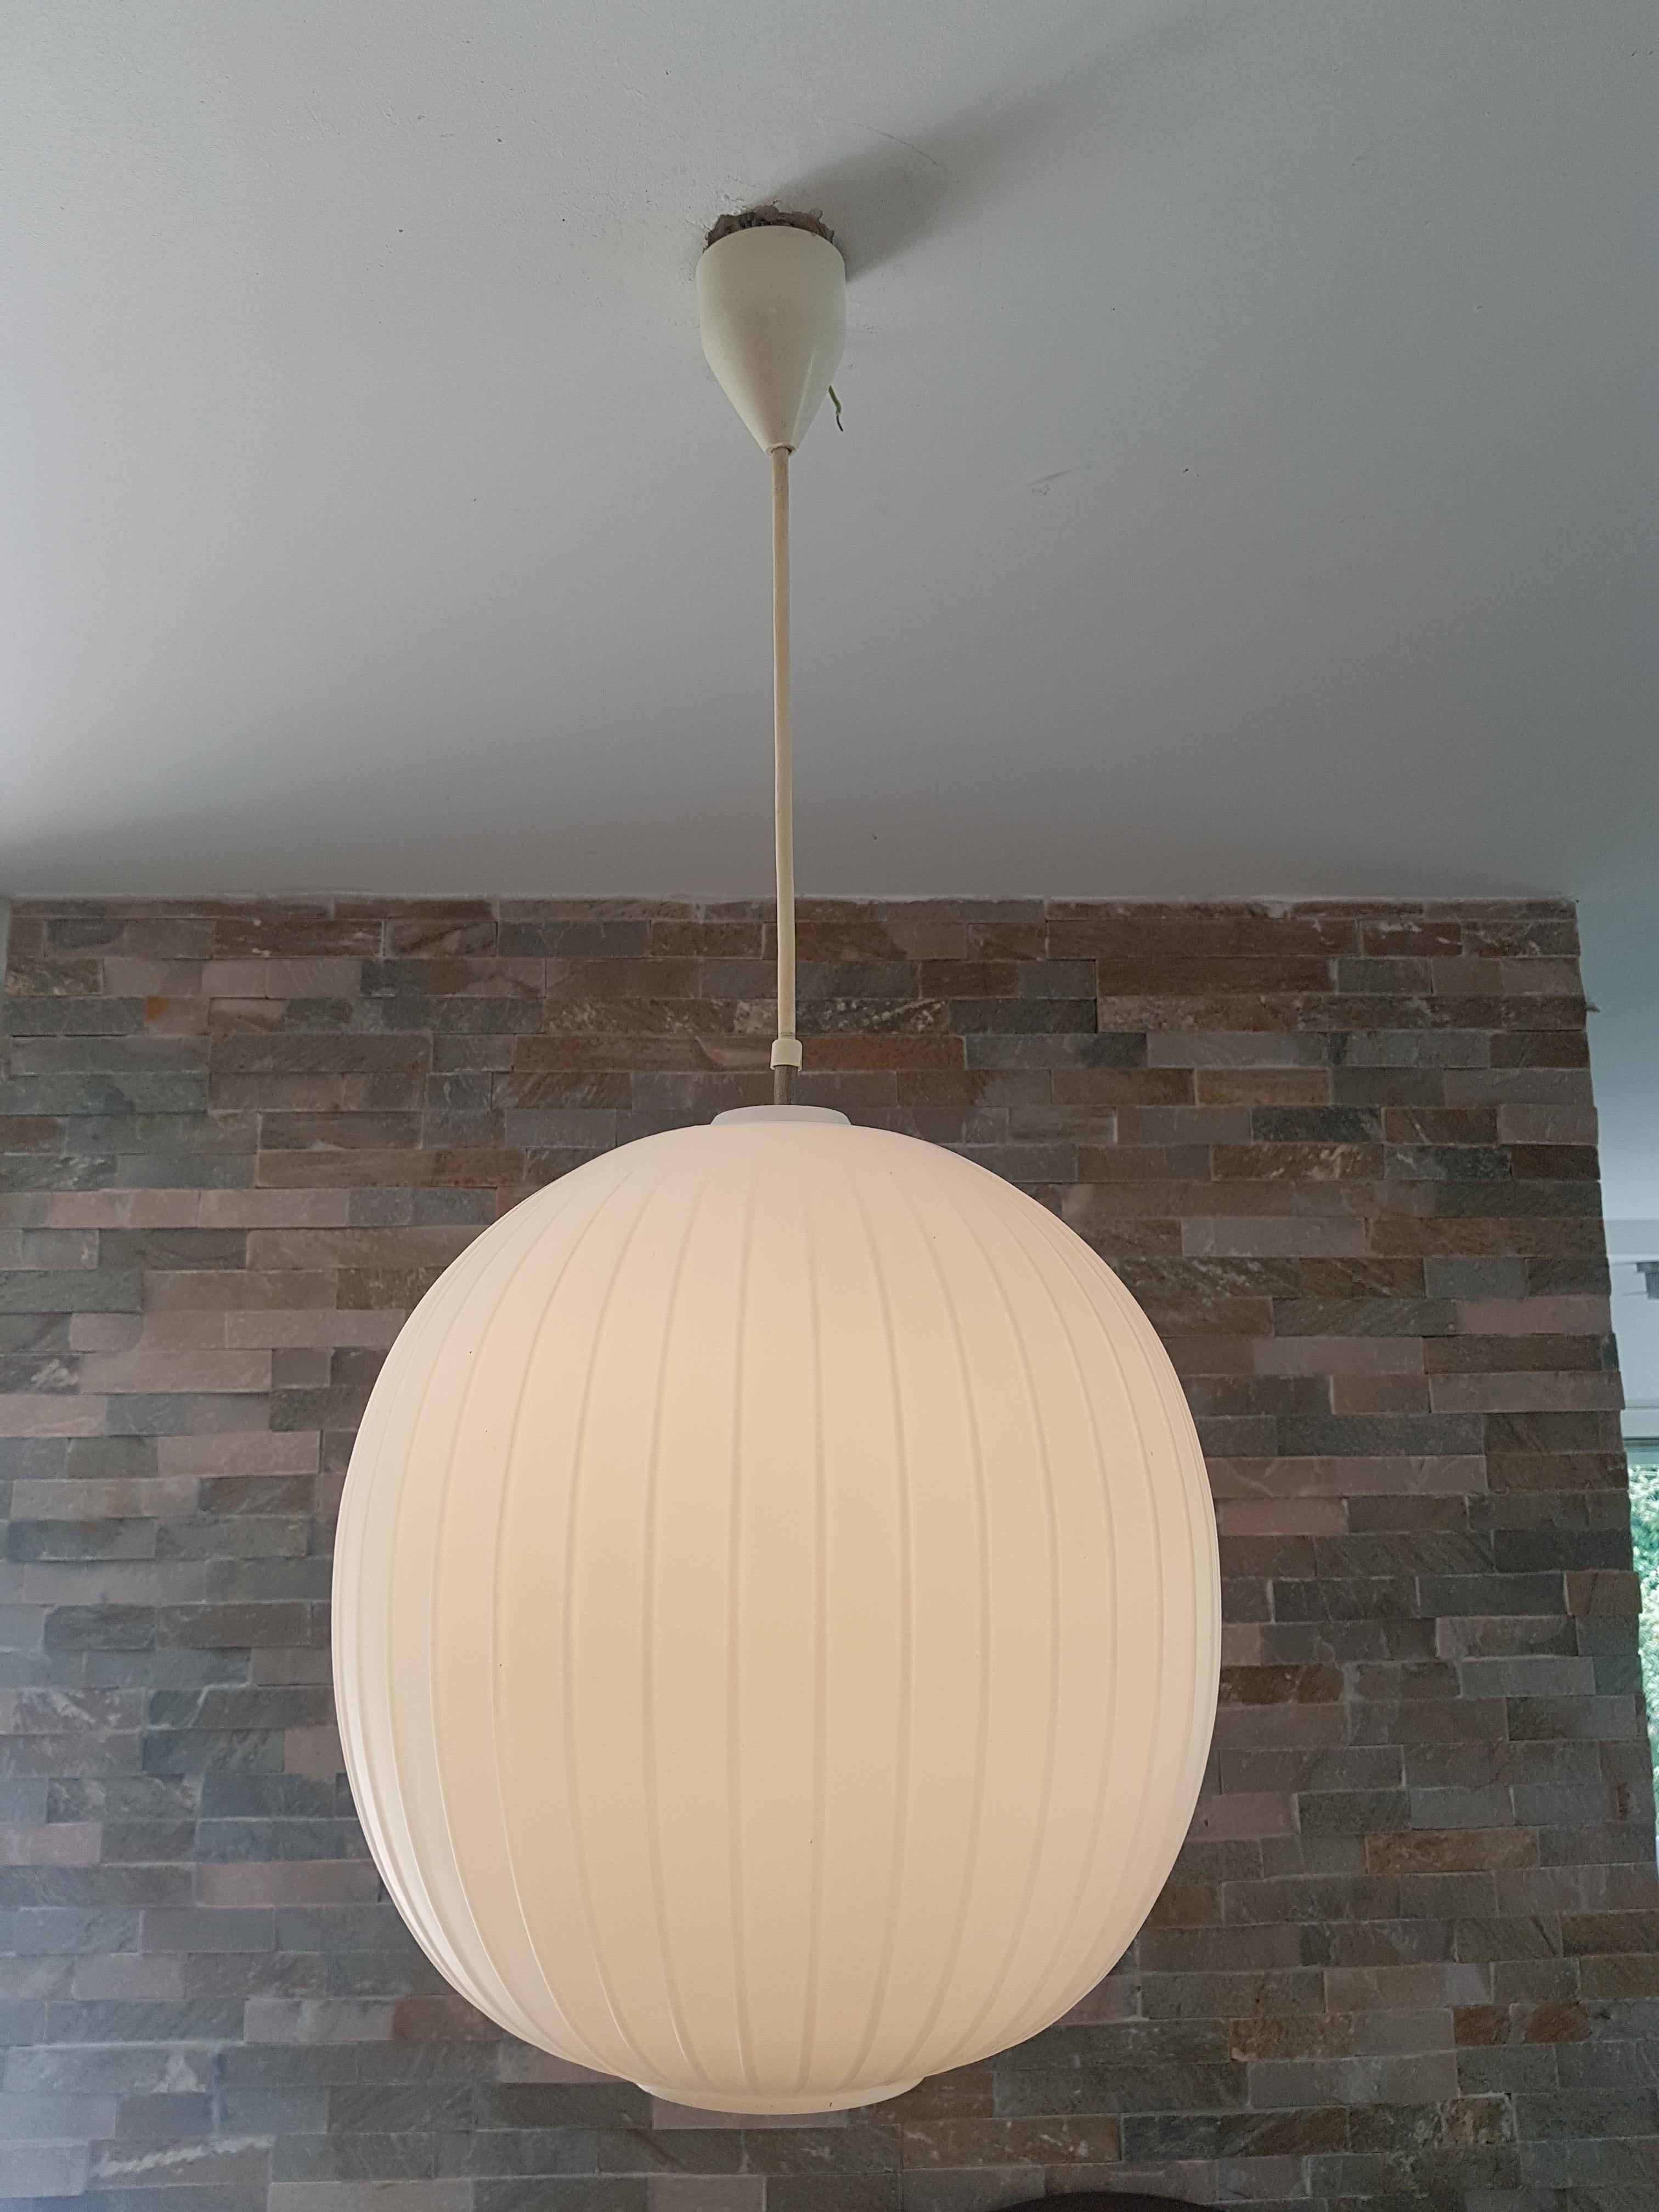 Midcentury Pendant Lamp Bologna by Gangkofner for Peill & Putzler, Germany, 1958 For Sale 11